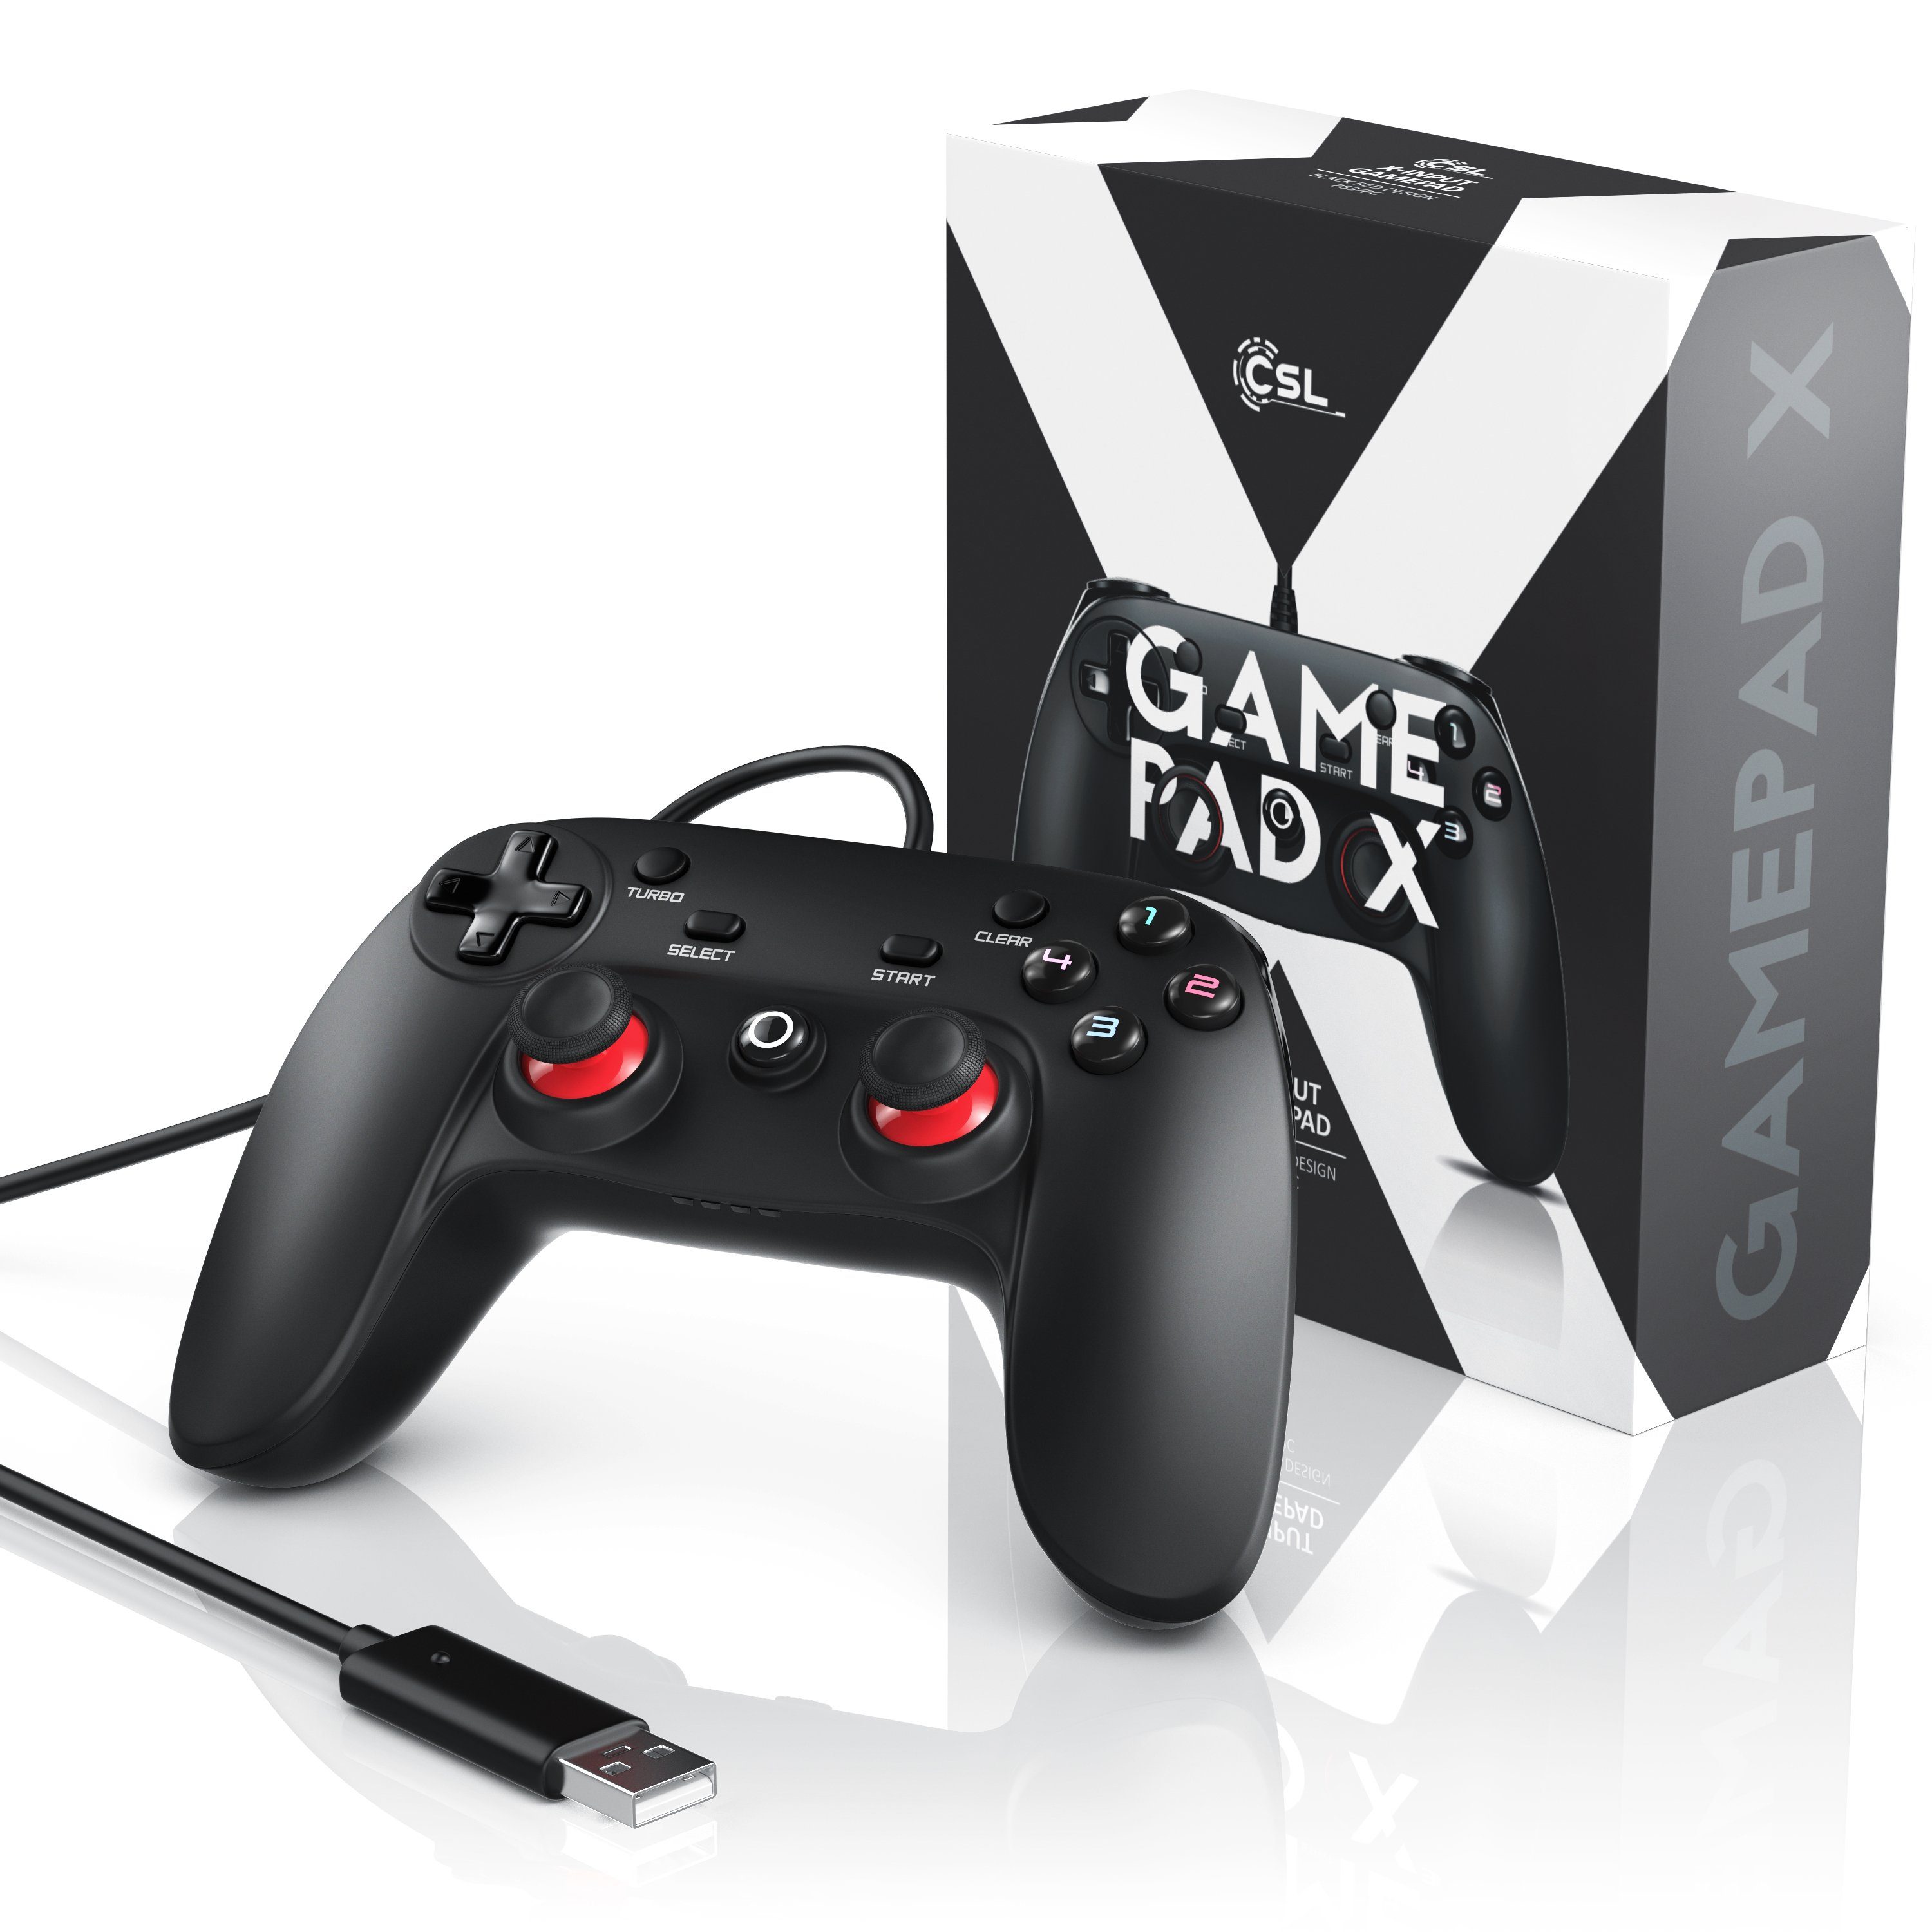 X-Input) (1 Funktion, & Vibration, Turbo St., CSL PC Gamepad, Direct Dual & Gaming-Controller PS3